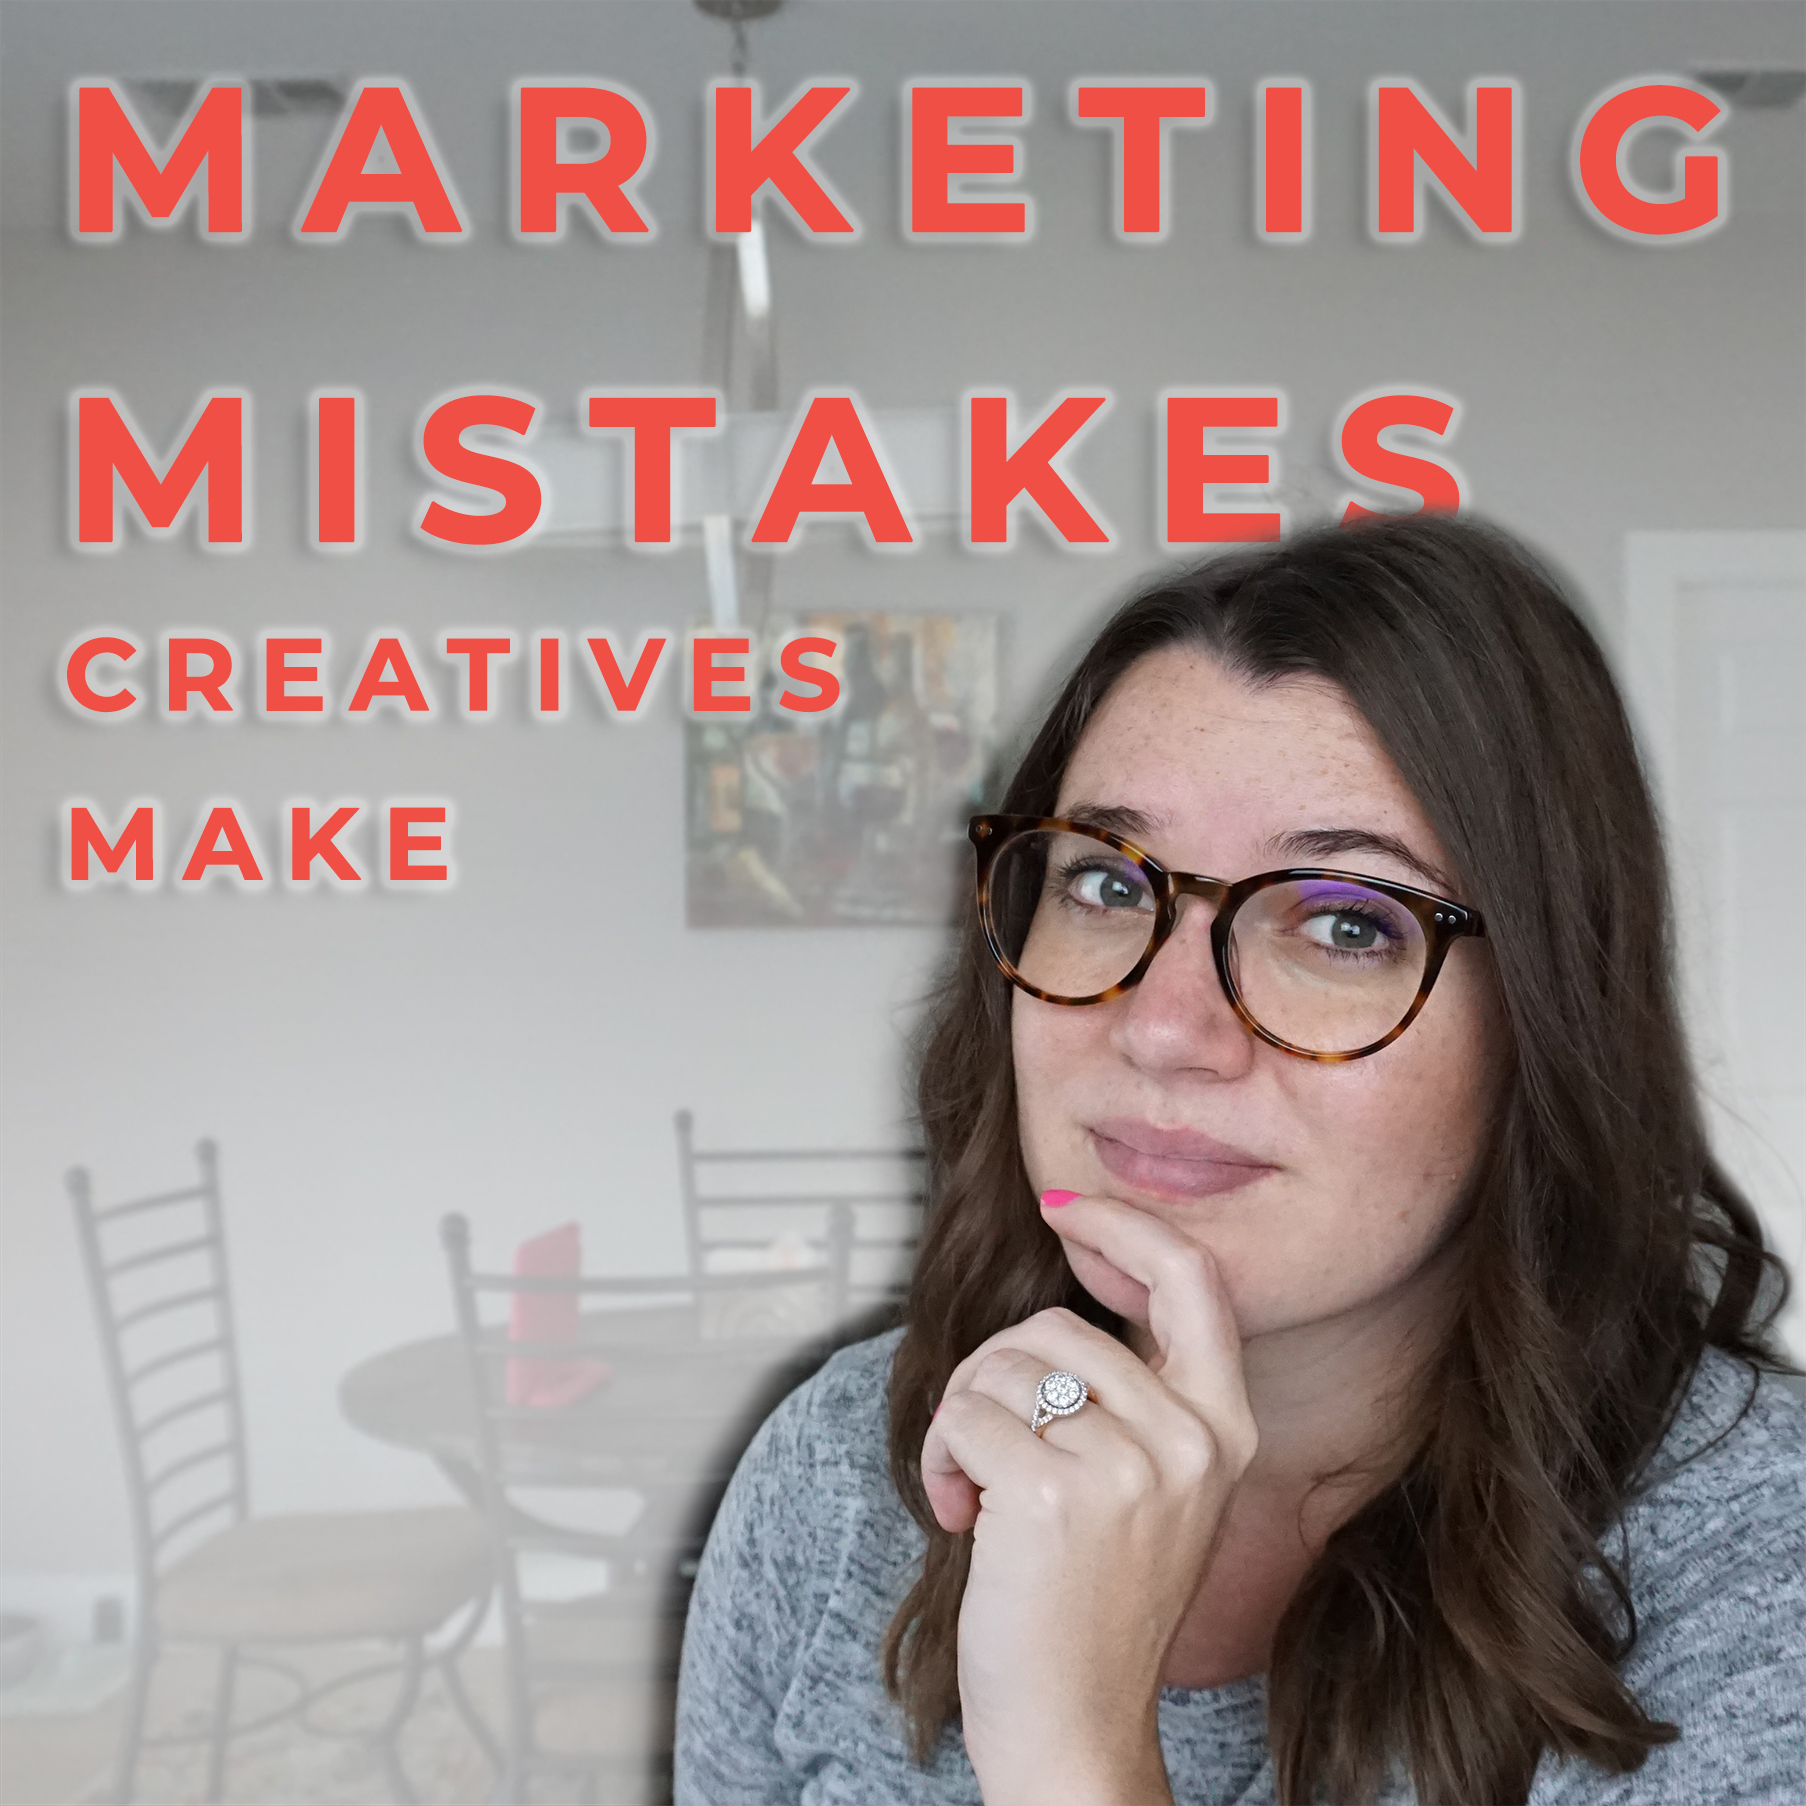 Marketing mistakes creatives often make and how to avoid them